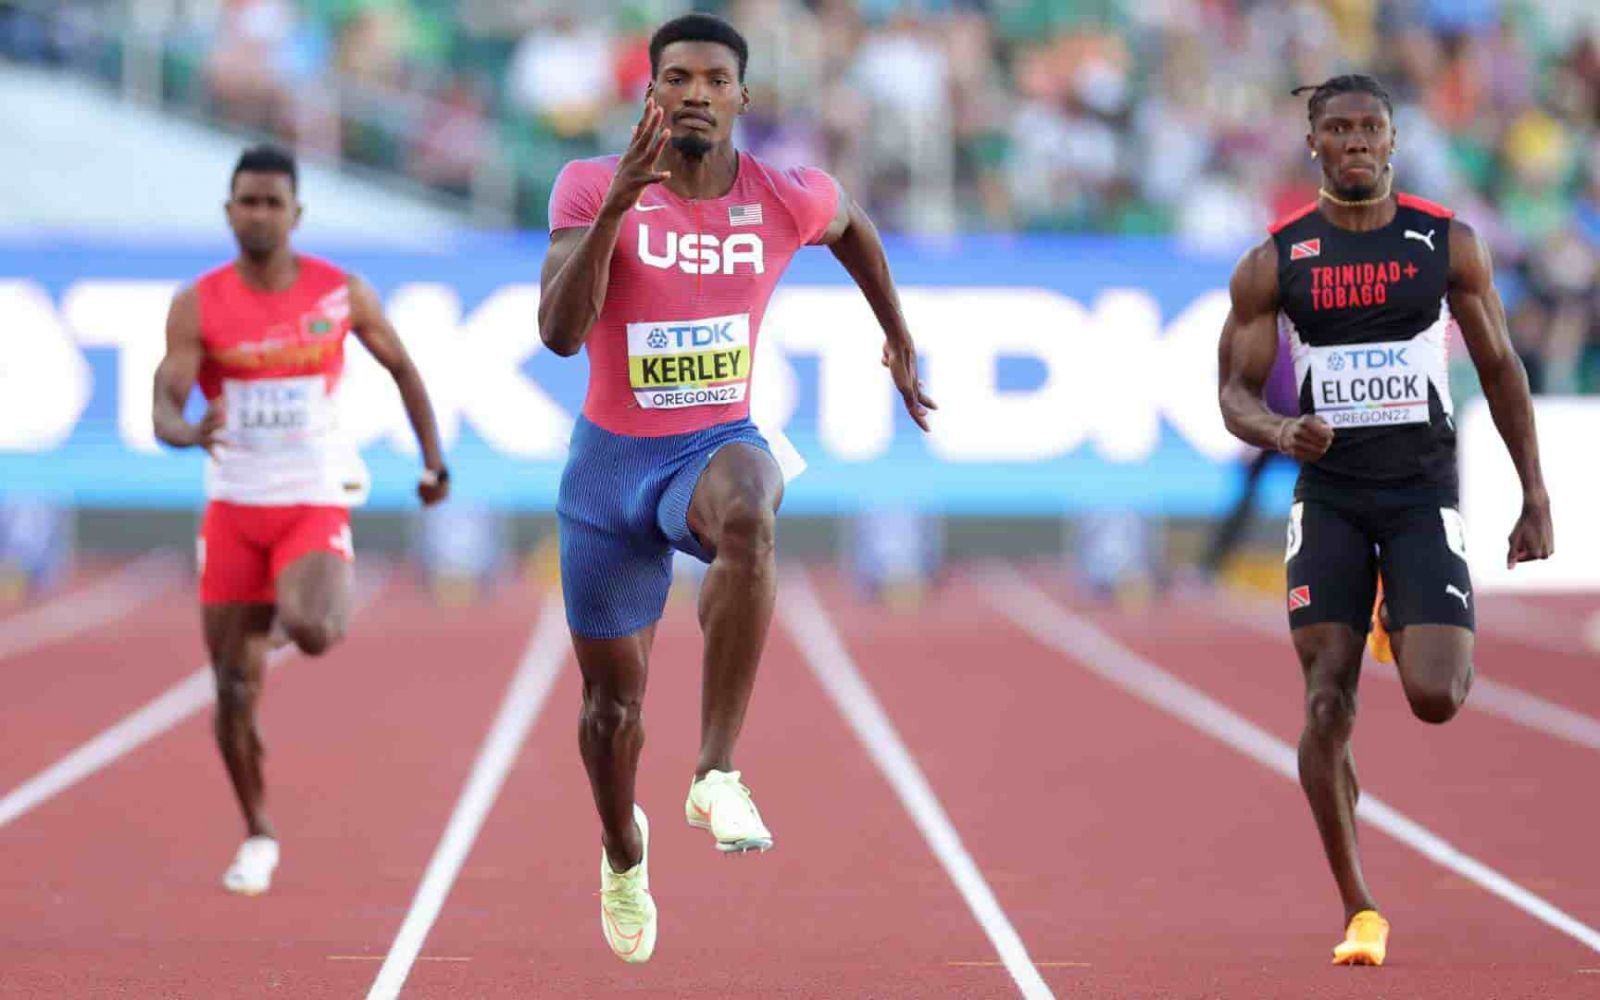 Kerley wins World Championships 100m title as the USA sweeps the podium